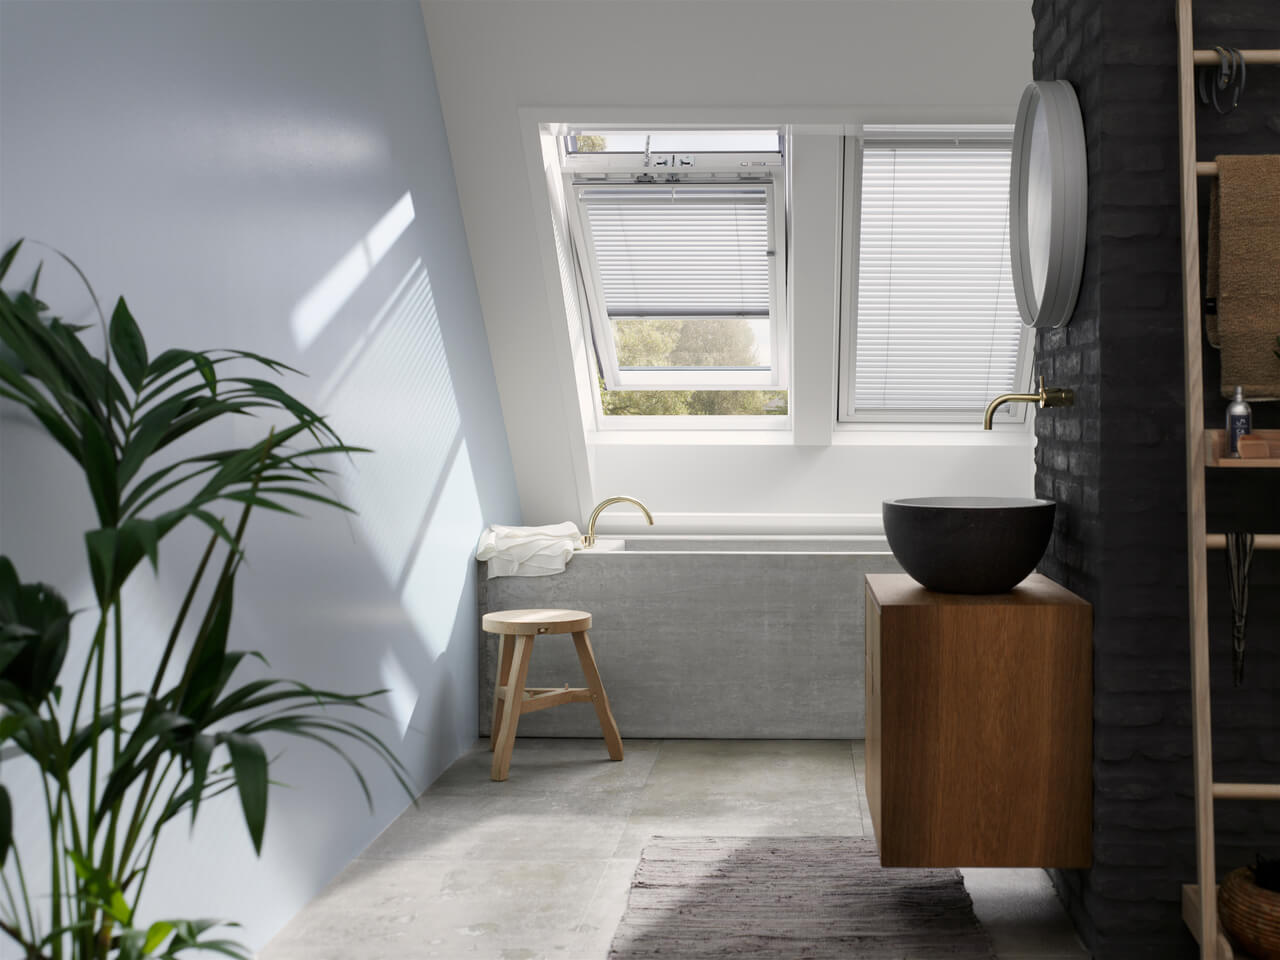 A white painted bathroom area with sink and mirror and a two roof windows with blinds